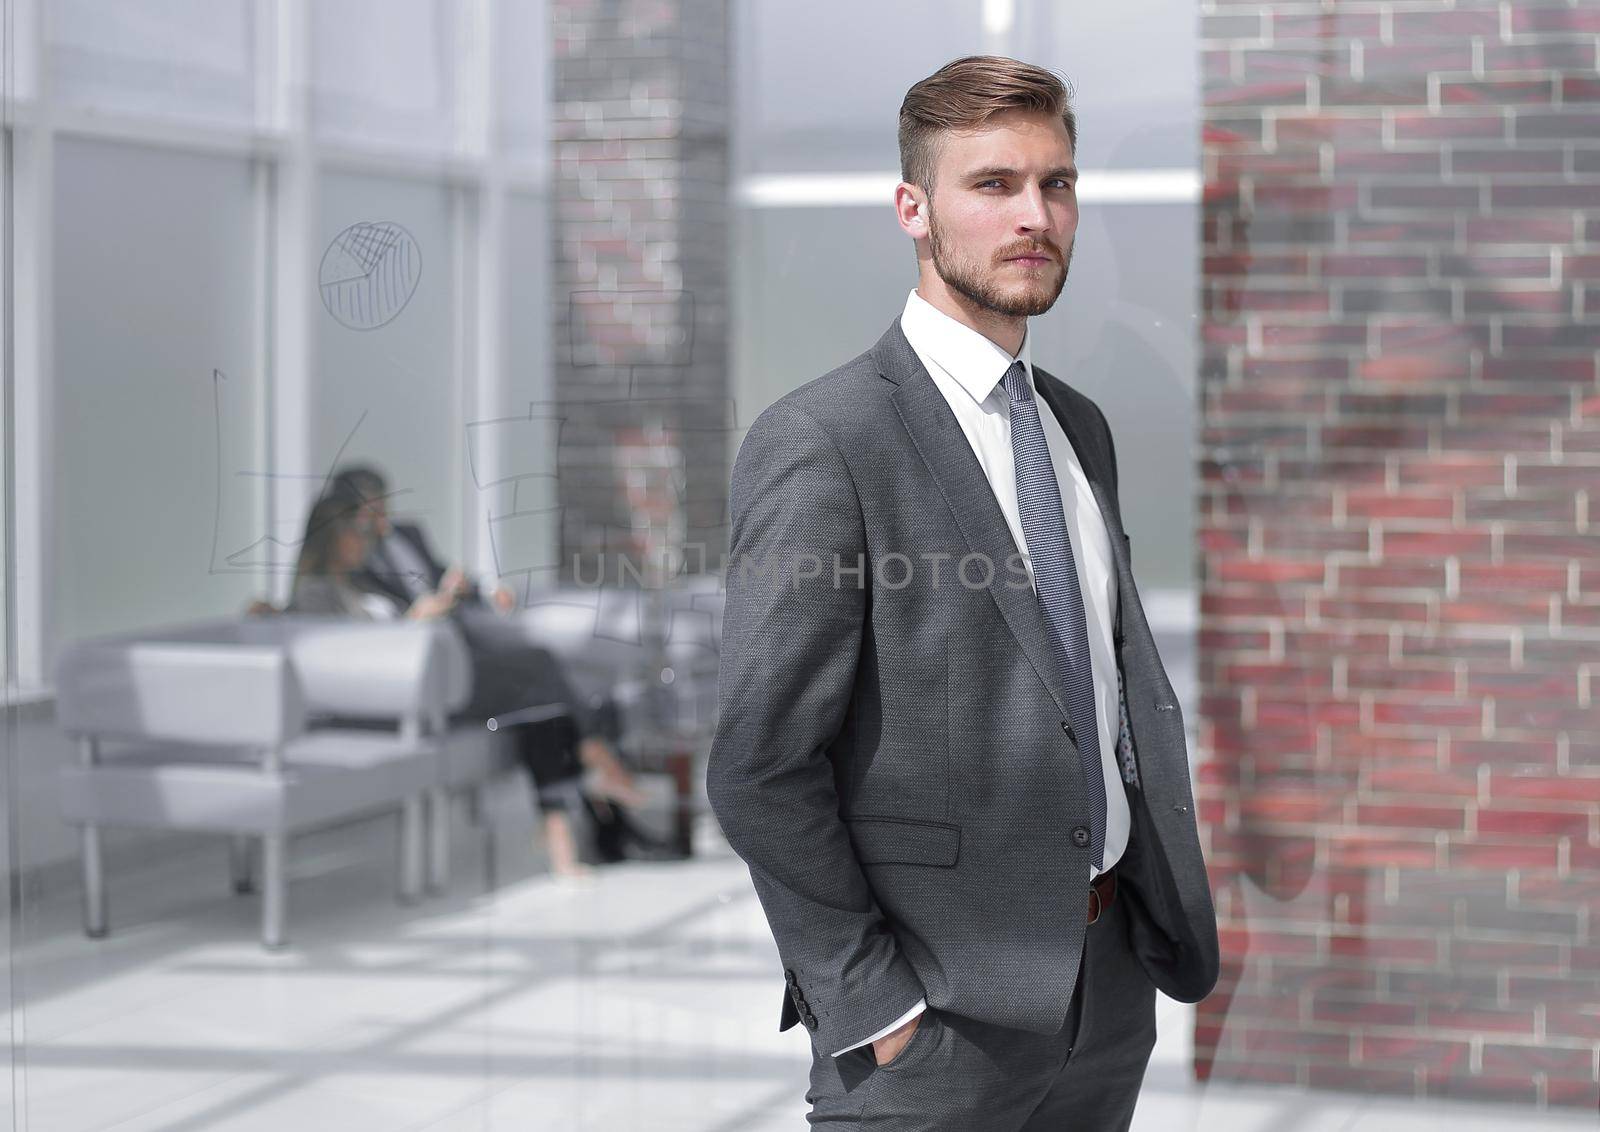 portrait of a successful business man by asdf